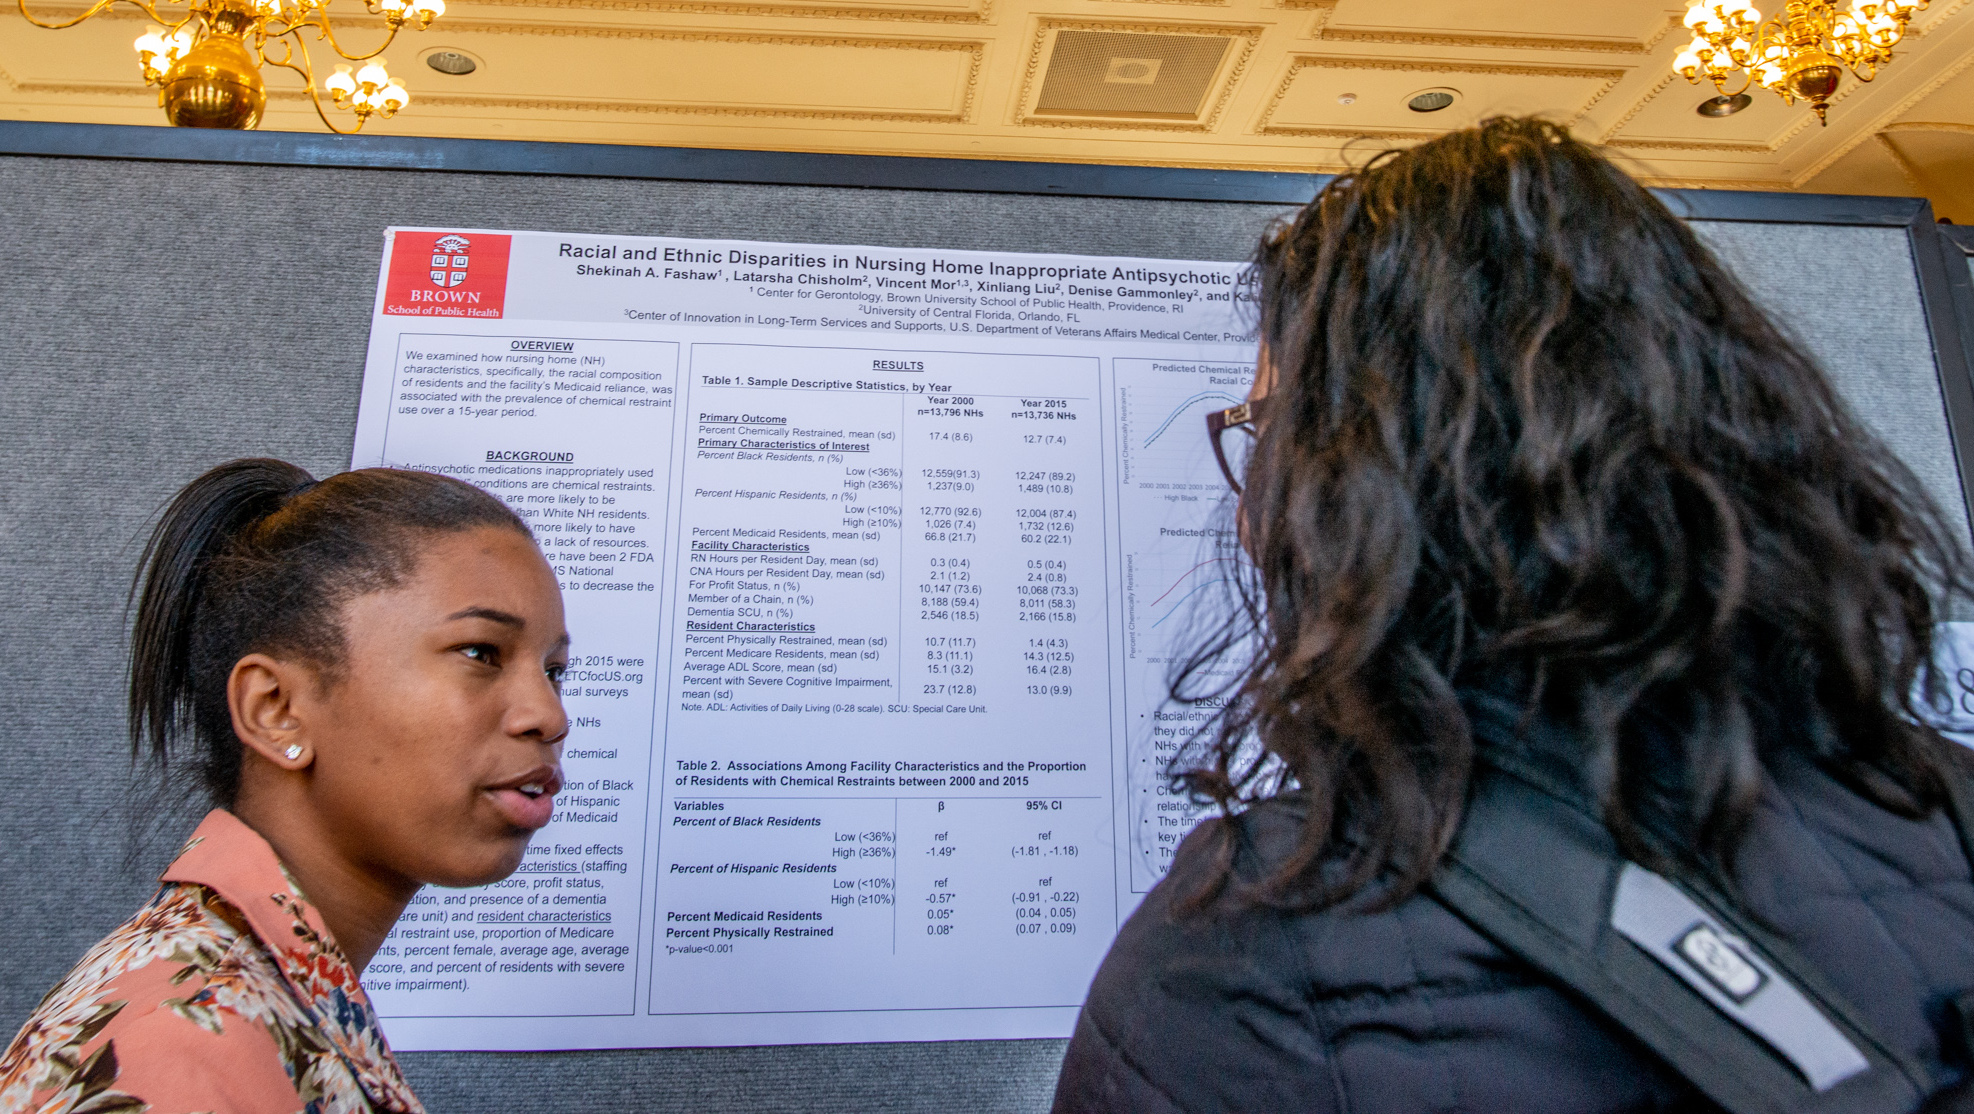 Second-year doctoral student Shekinah Fashaw presented on her work analyzing data on nursing homes from 2000-2015. 